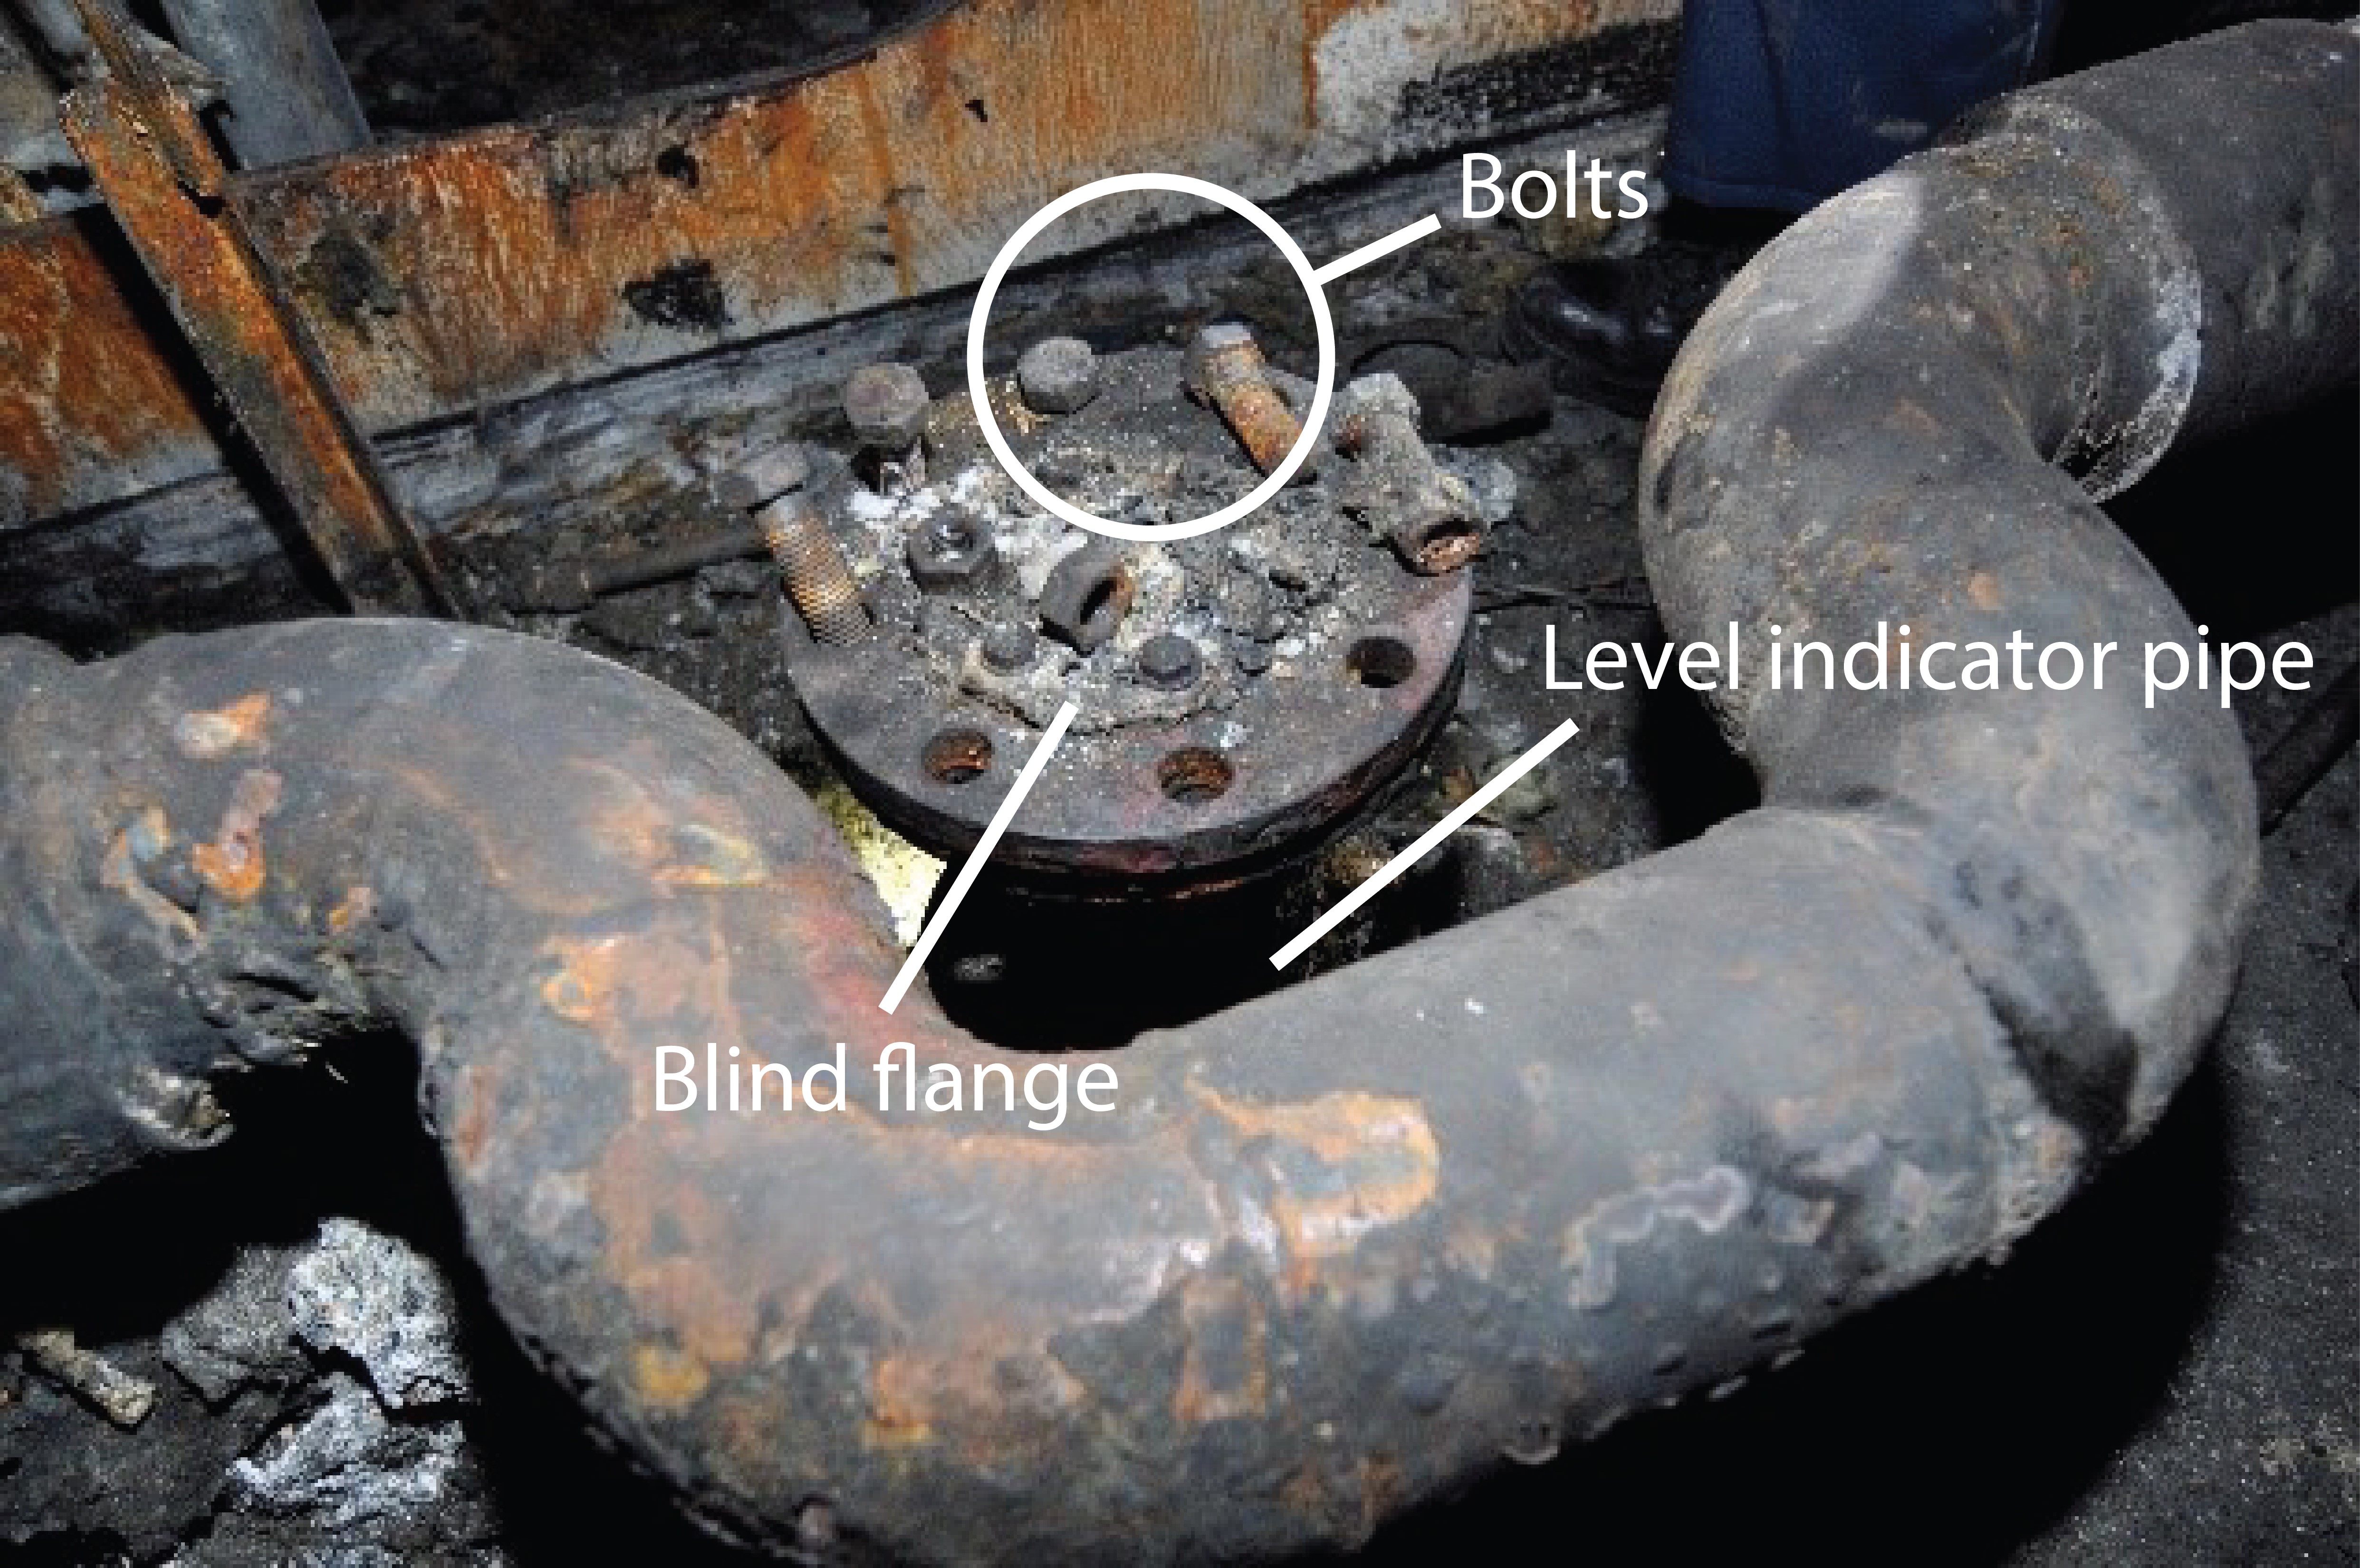 Blind flange secured by 1 bolt on the level indicator pipe on the heavy fuel oil service tank (Source: TSB)